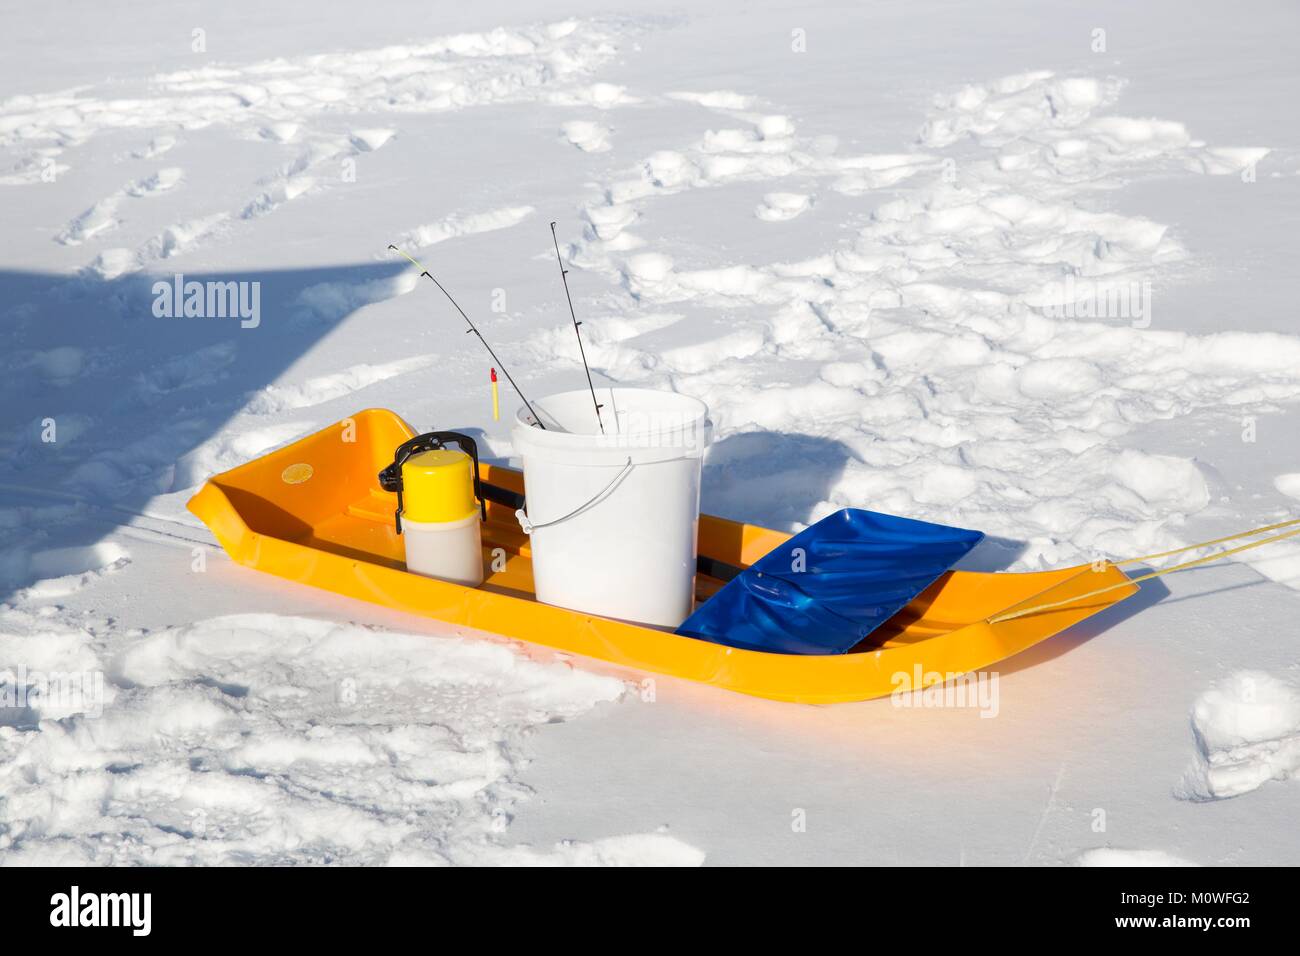 https://c8.alamy.com/comp/M0WFG2/a-yellow-sled-with-ice-fishing-gear-on-a-frozen-minnesota-lake-M0WFG2.jpg